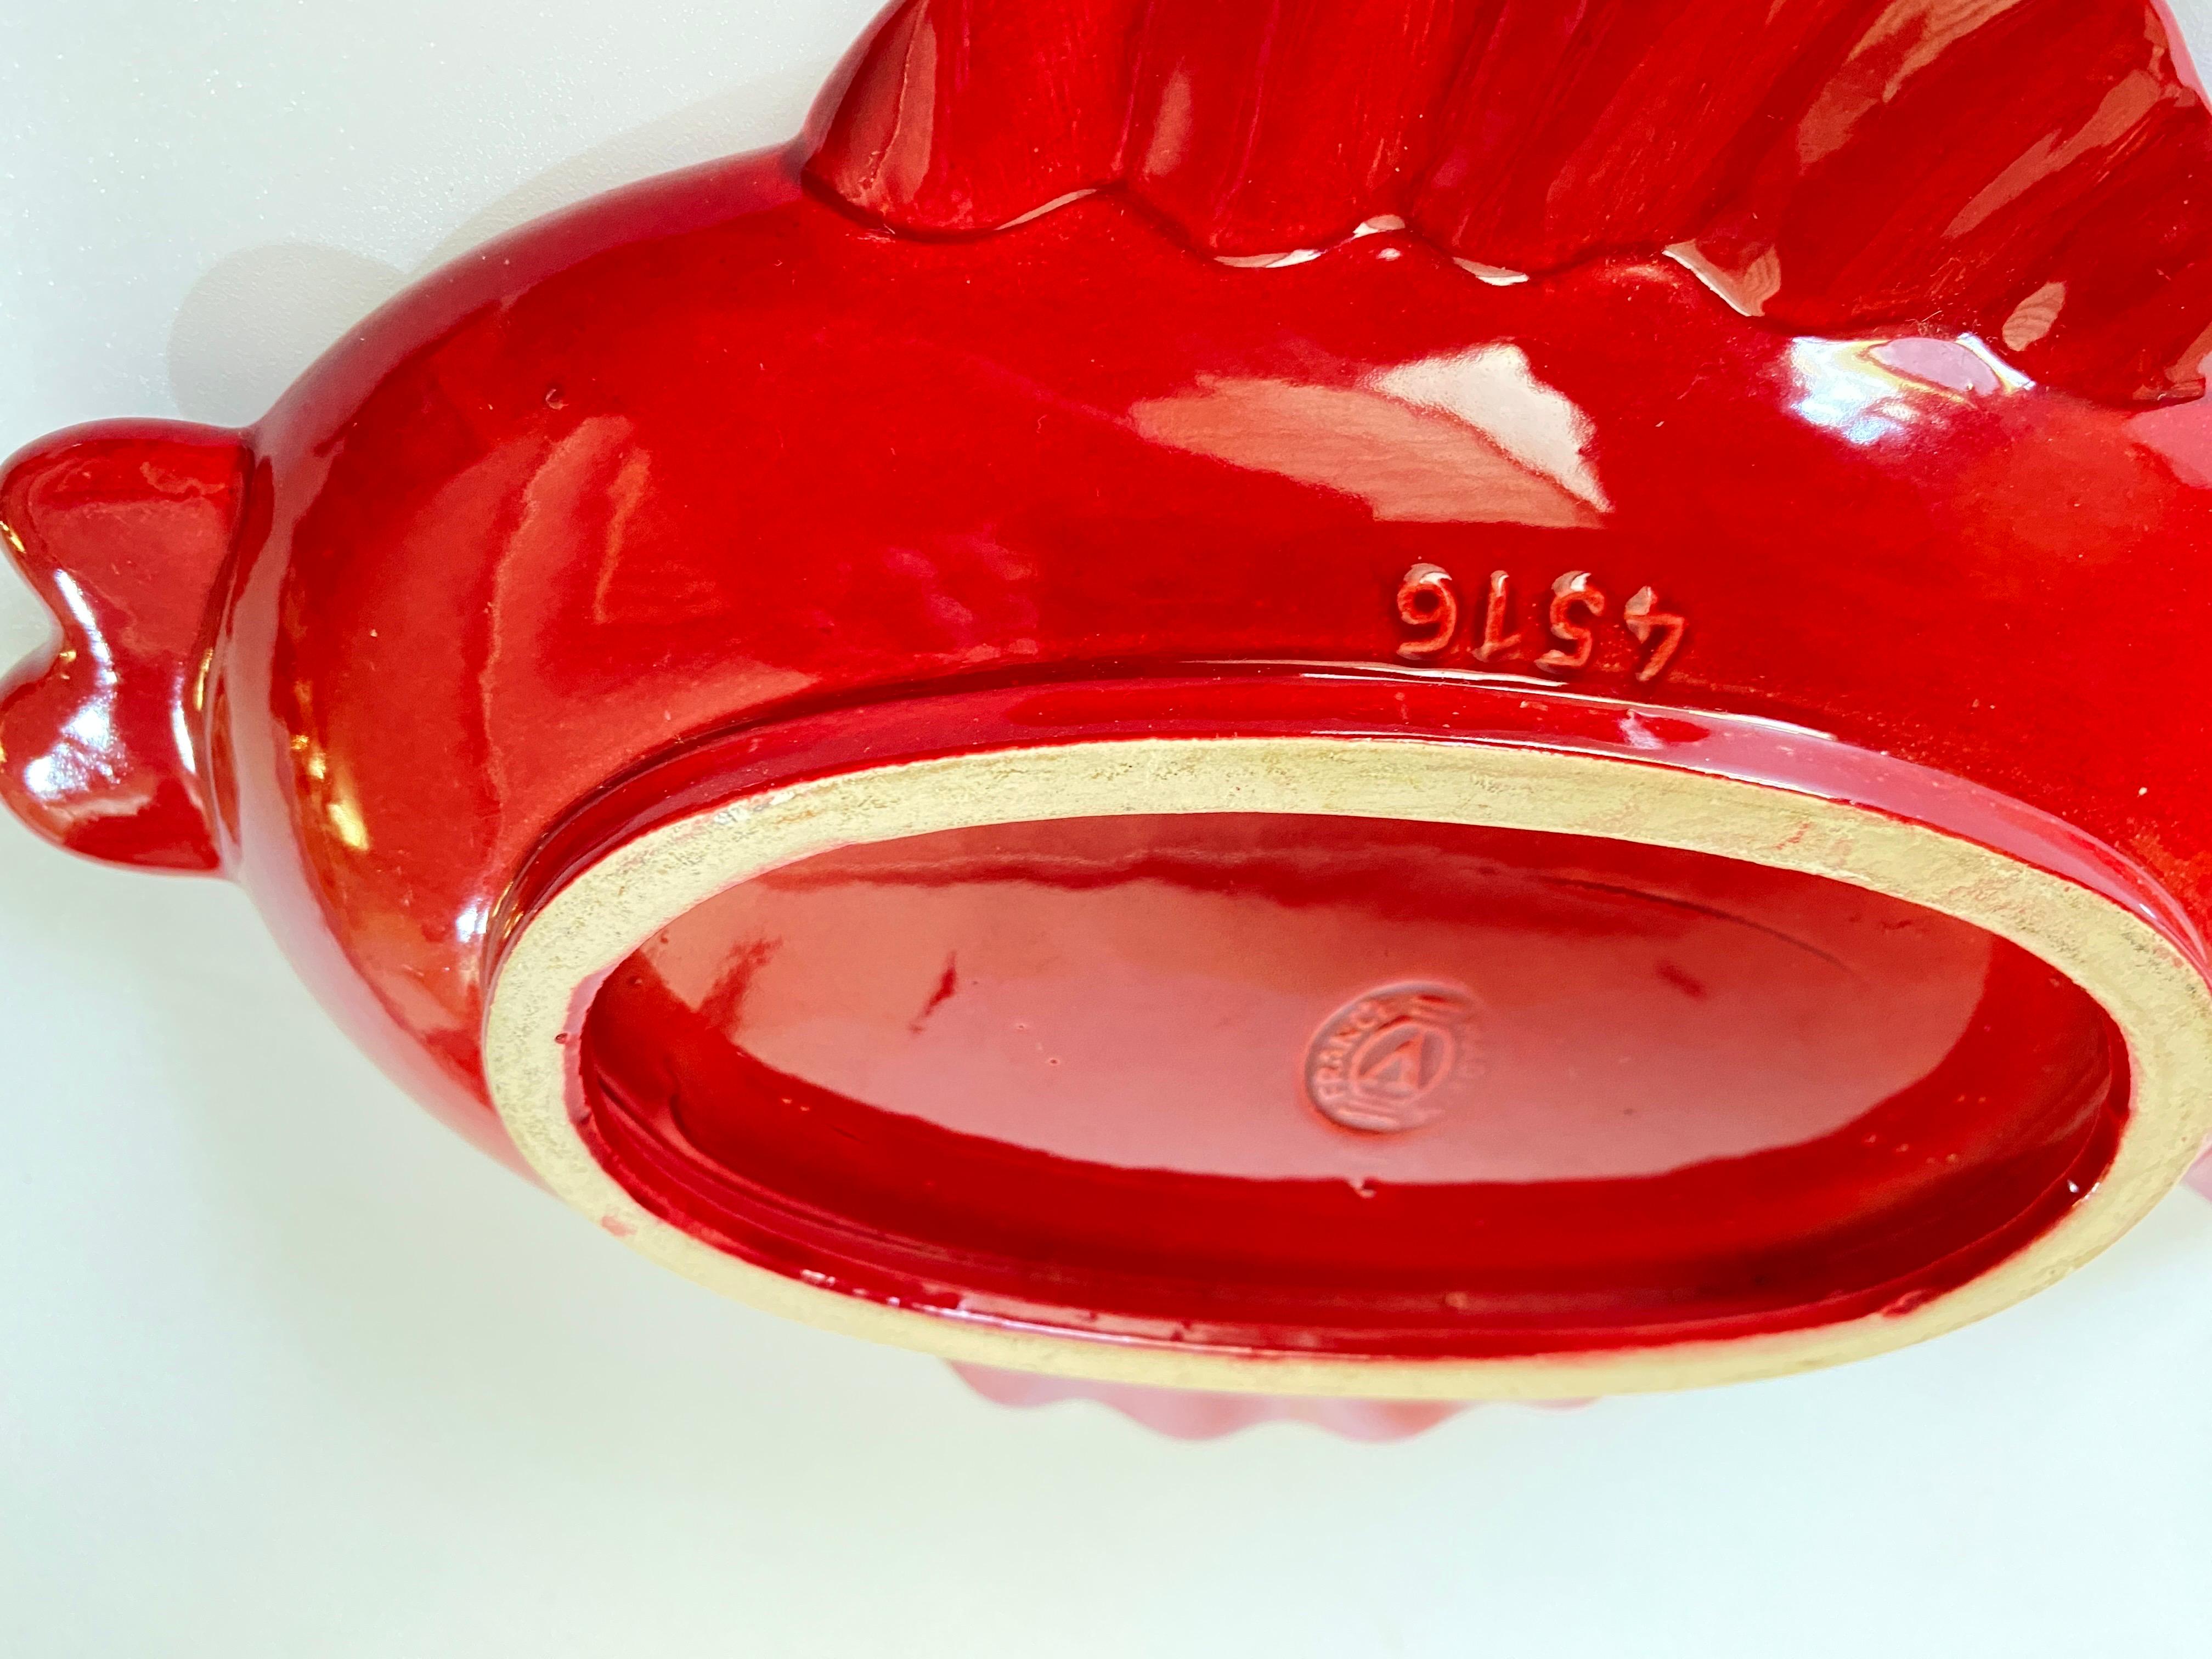 Ceramic Dish Ashtray or Centrepiece in Ceramic Art Deco Red Color In Good Condition For Sale In Auribeau sur Siagne, FR